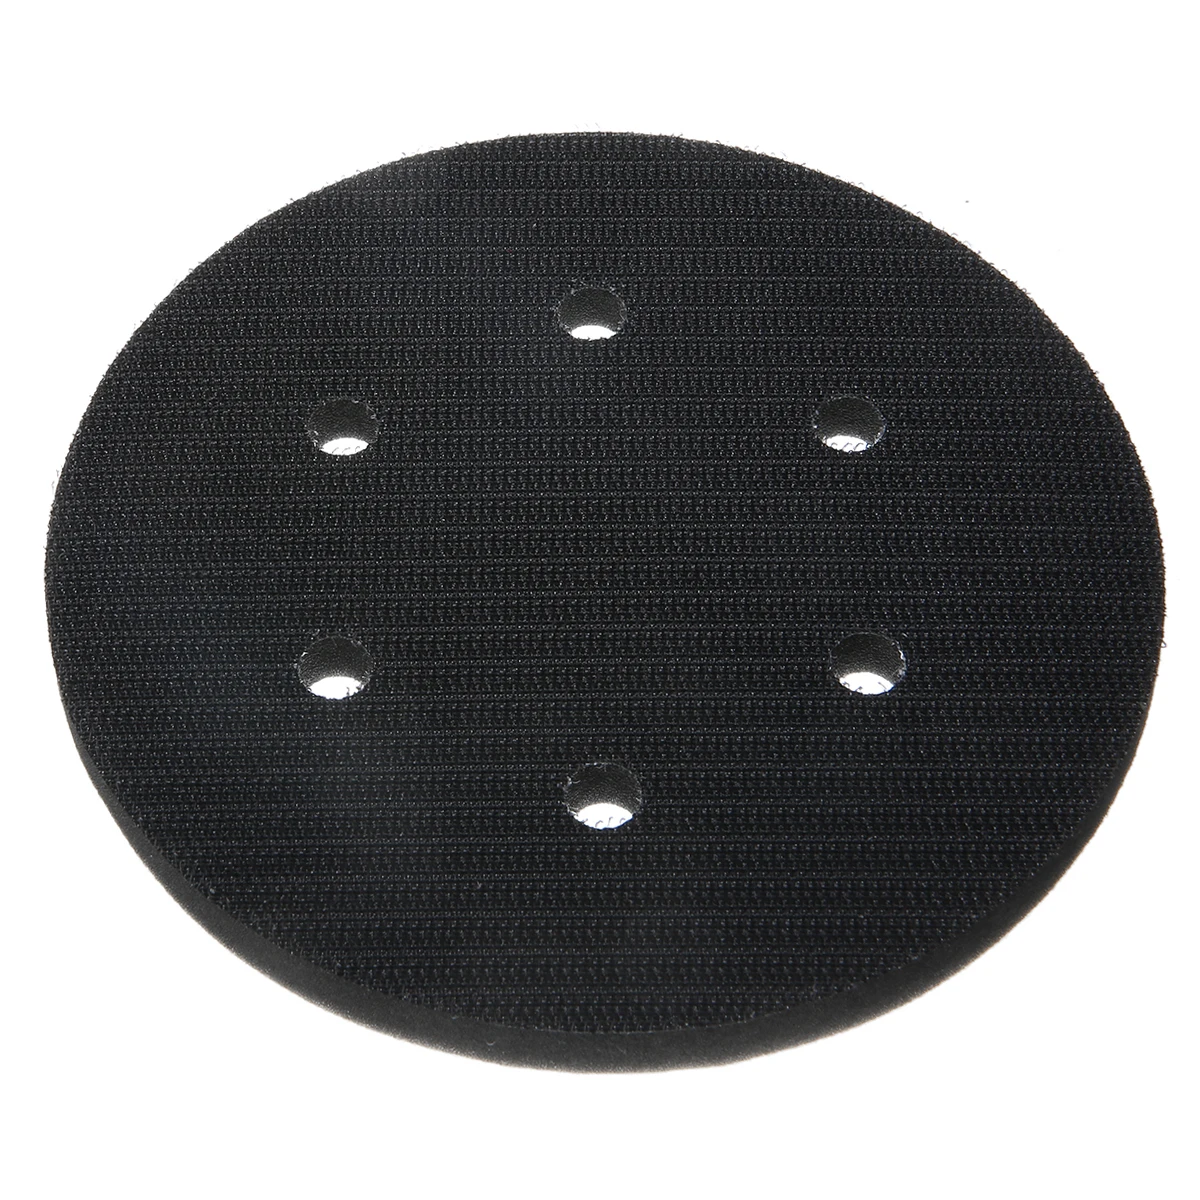 6 Inch 150mm 6 Hole Interface Cushion Pad Hook and Loop Foam Backing Pad for Protecting Sanding Disc Power Sander Accessories